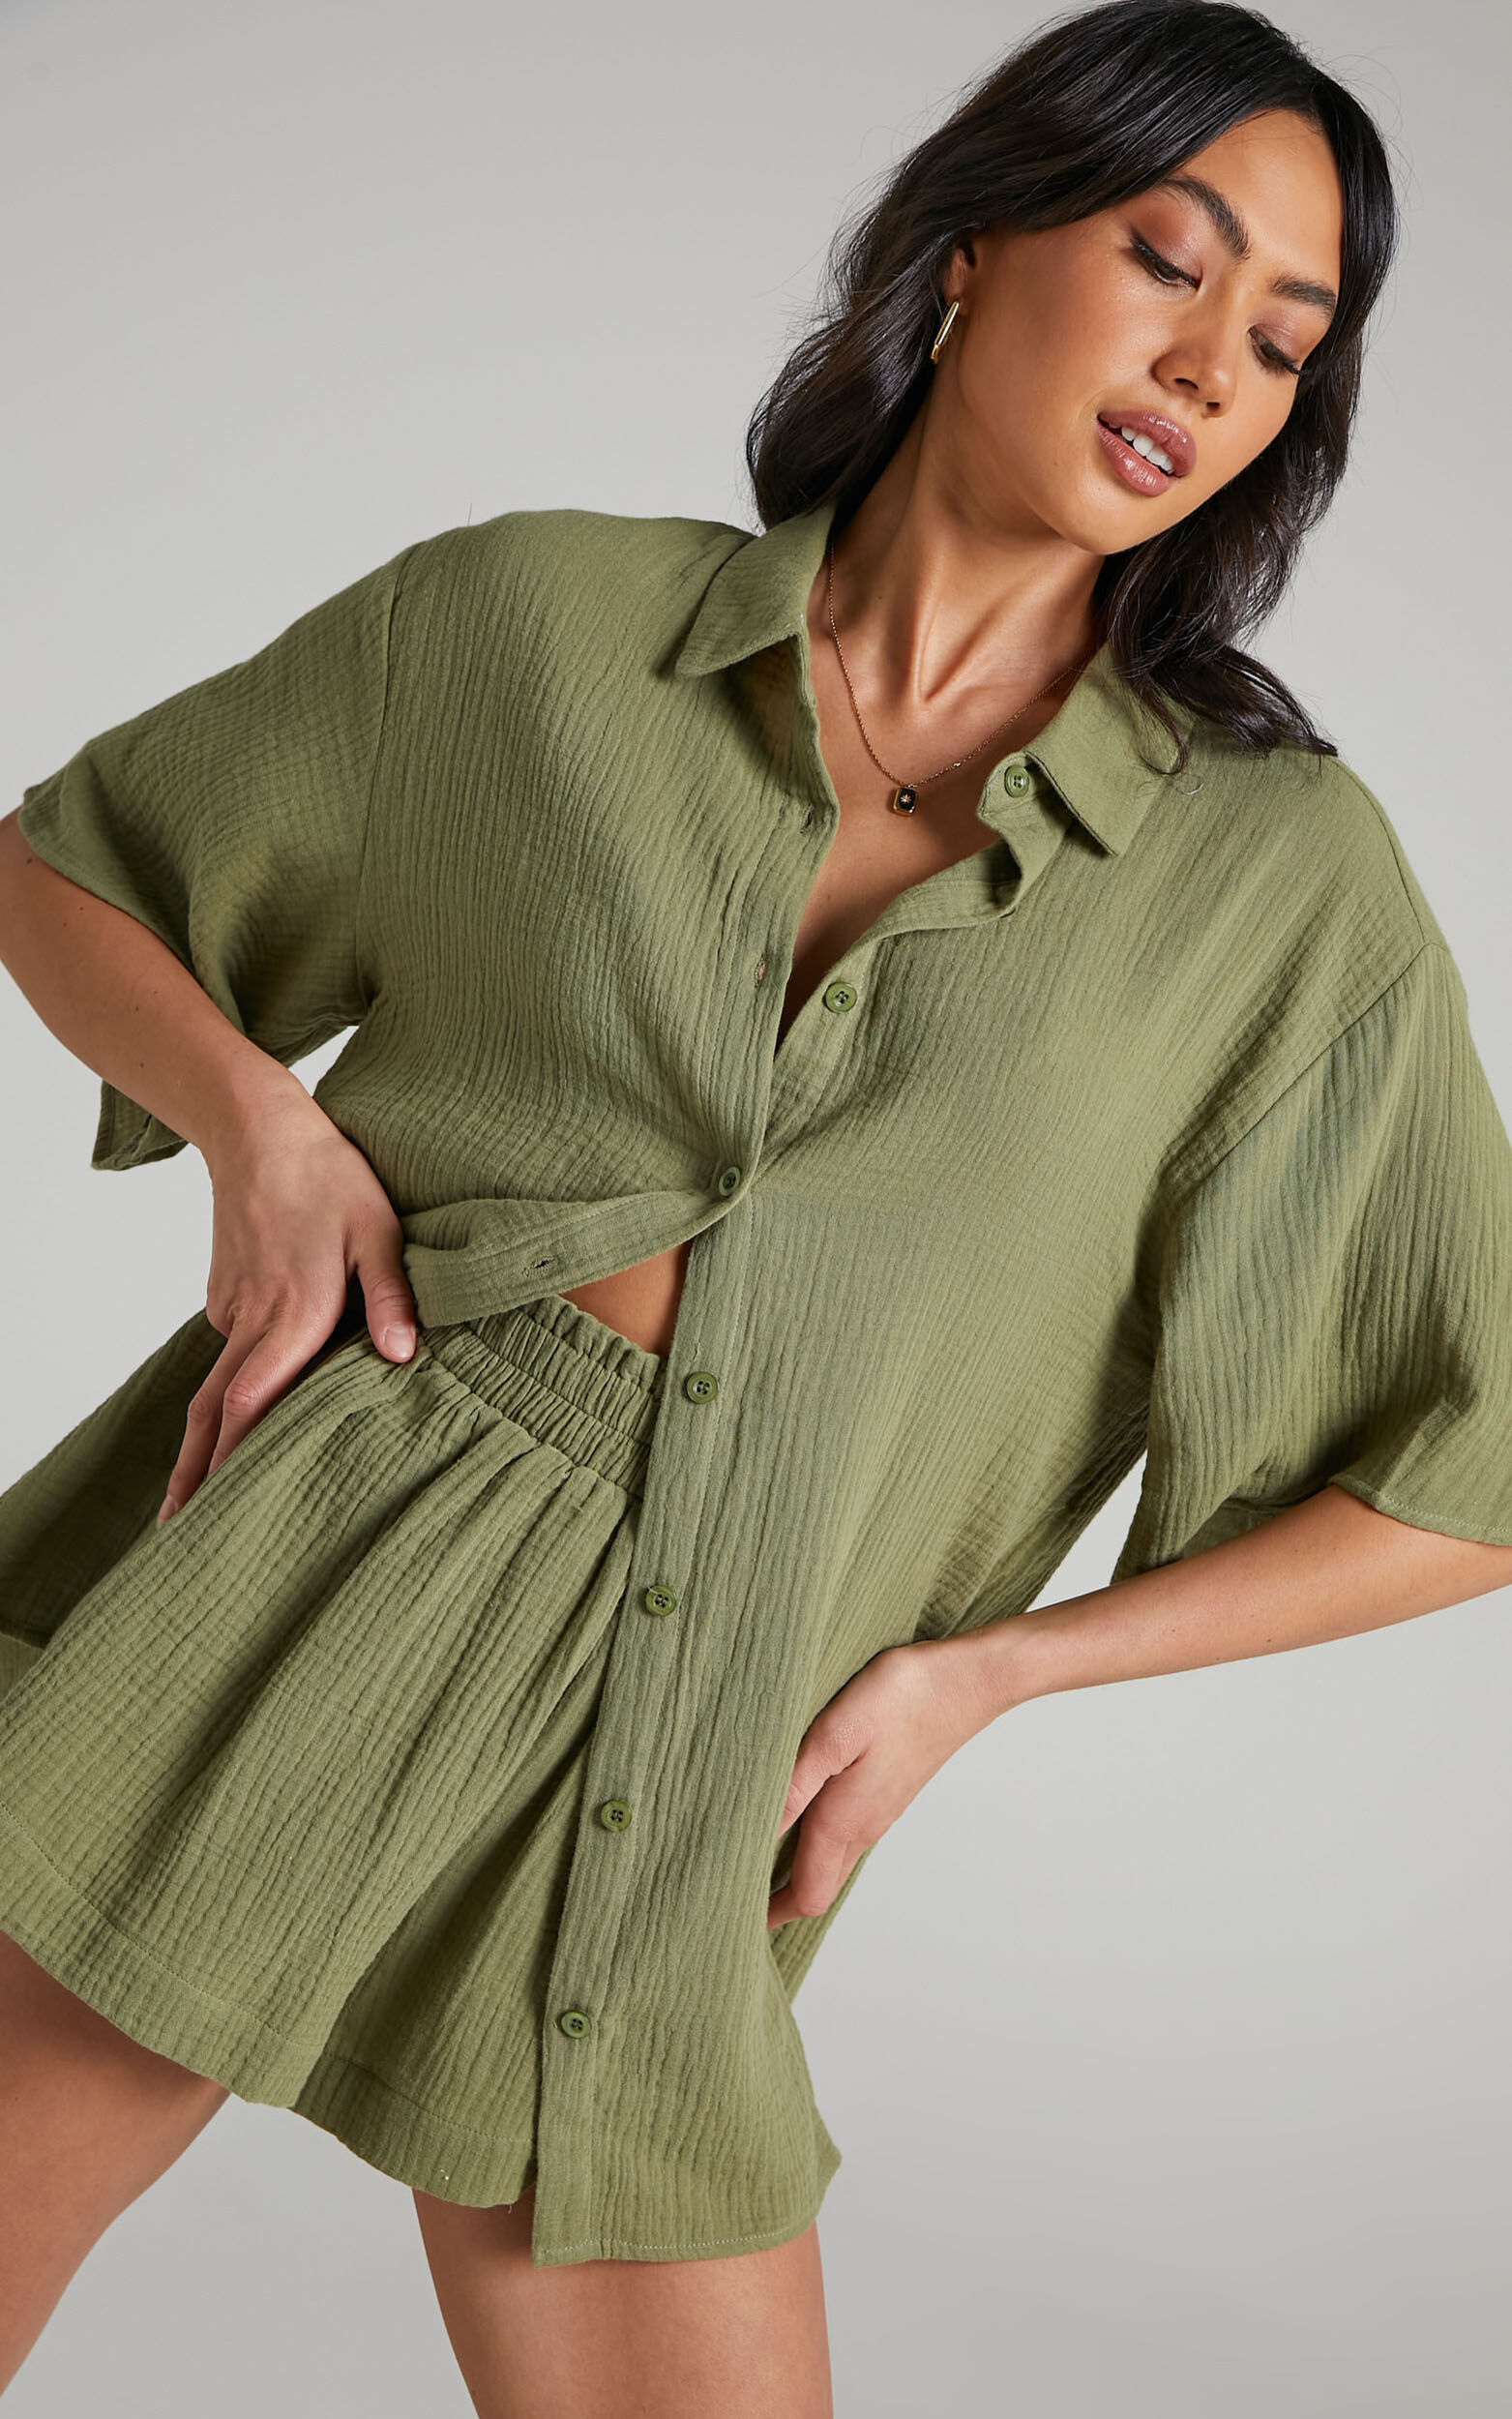 Atom Oversized Button Up Shirt in Khaki - 06, GRN1, super-hi-res image number null